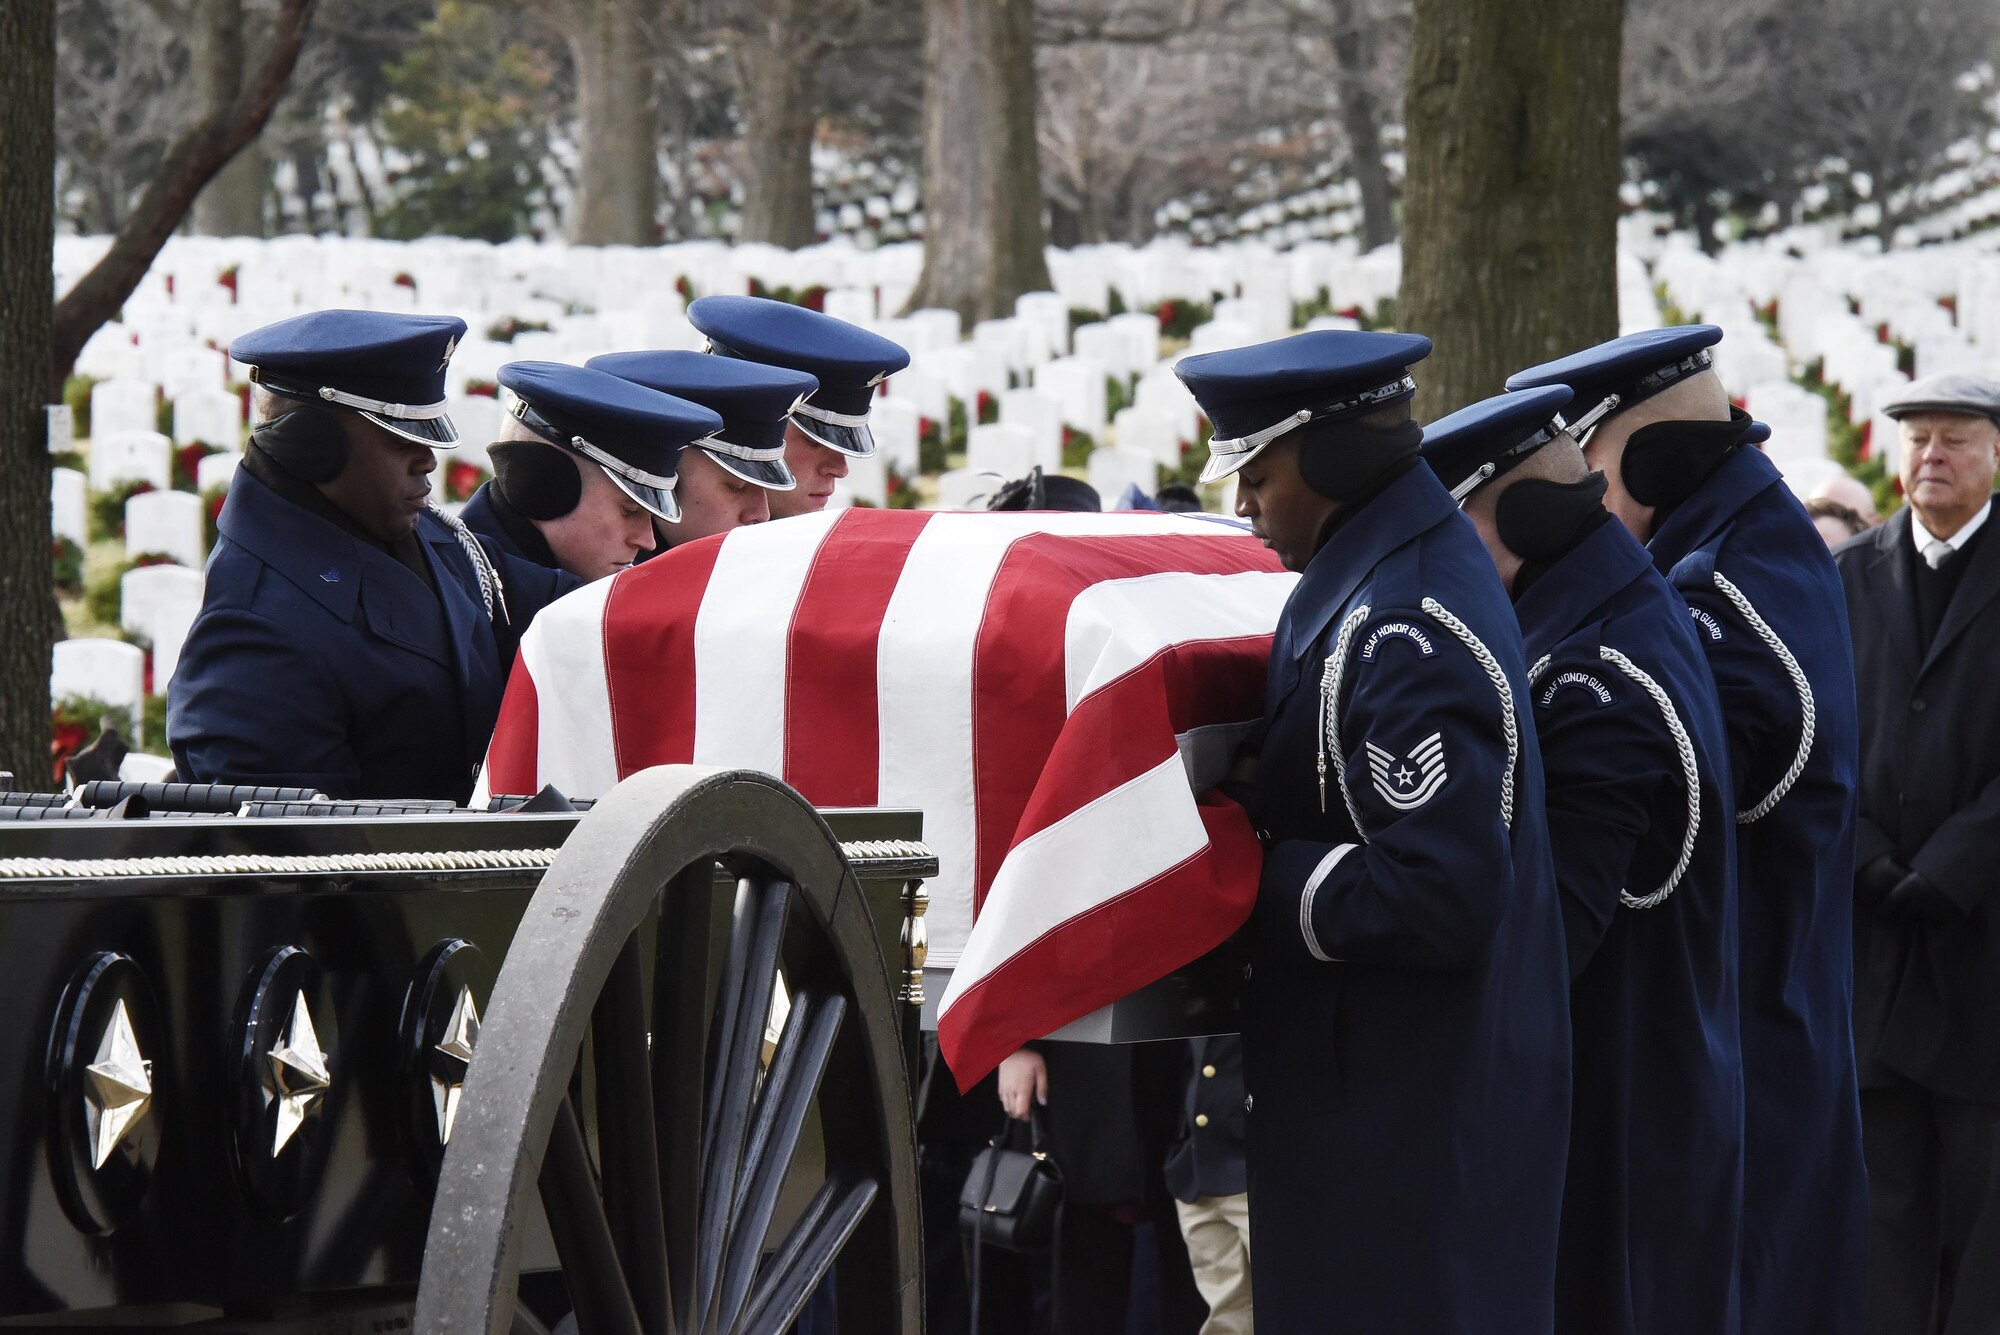 Members of the U.S. Air Force Honor Guard remove Maj. Troy Gilbert from a caisson during his interment at Arlington National Cemetery, Va., Dec. 19, 2016. Gilbert was killed Nov. 27, 2006, while flying a mission in direct support of coalition ground combat operations when his F-16C Fighting Falcon crashed approximately 20 miles northwest of Baghdad. (U.S. Air Force photo/Staff Sgt. Alyssa C. Gibson)